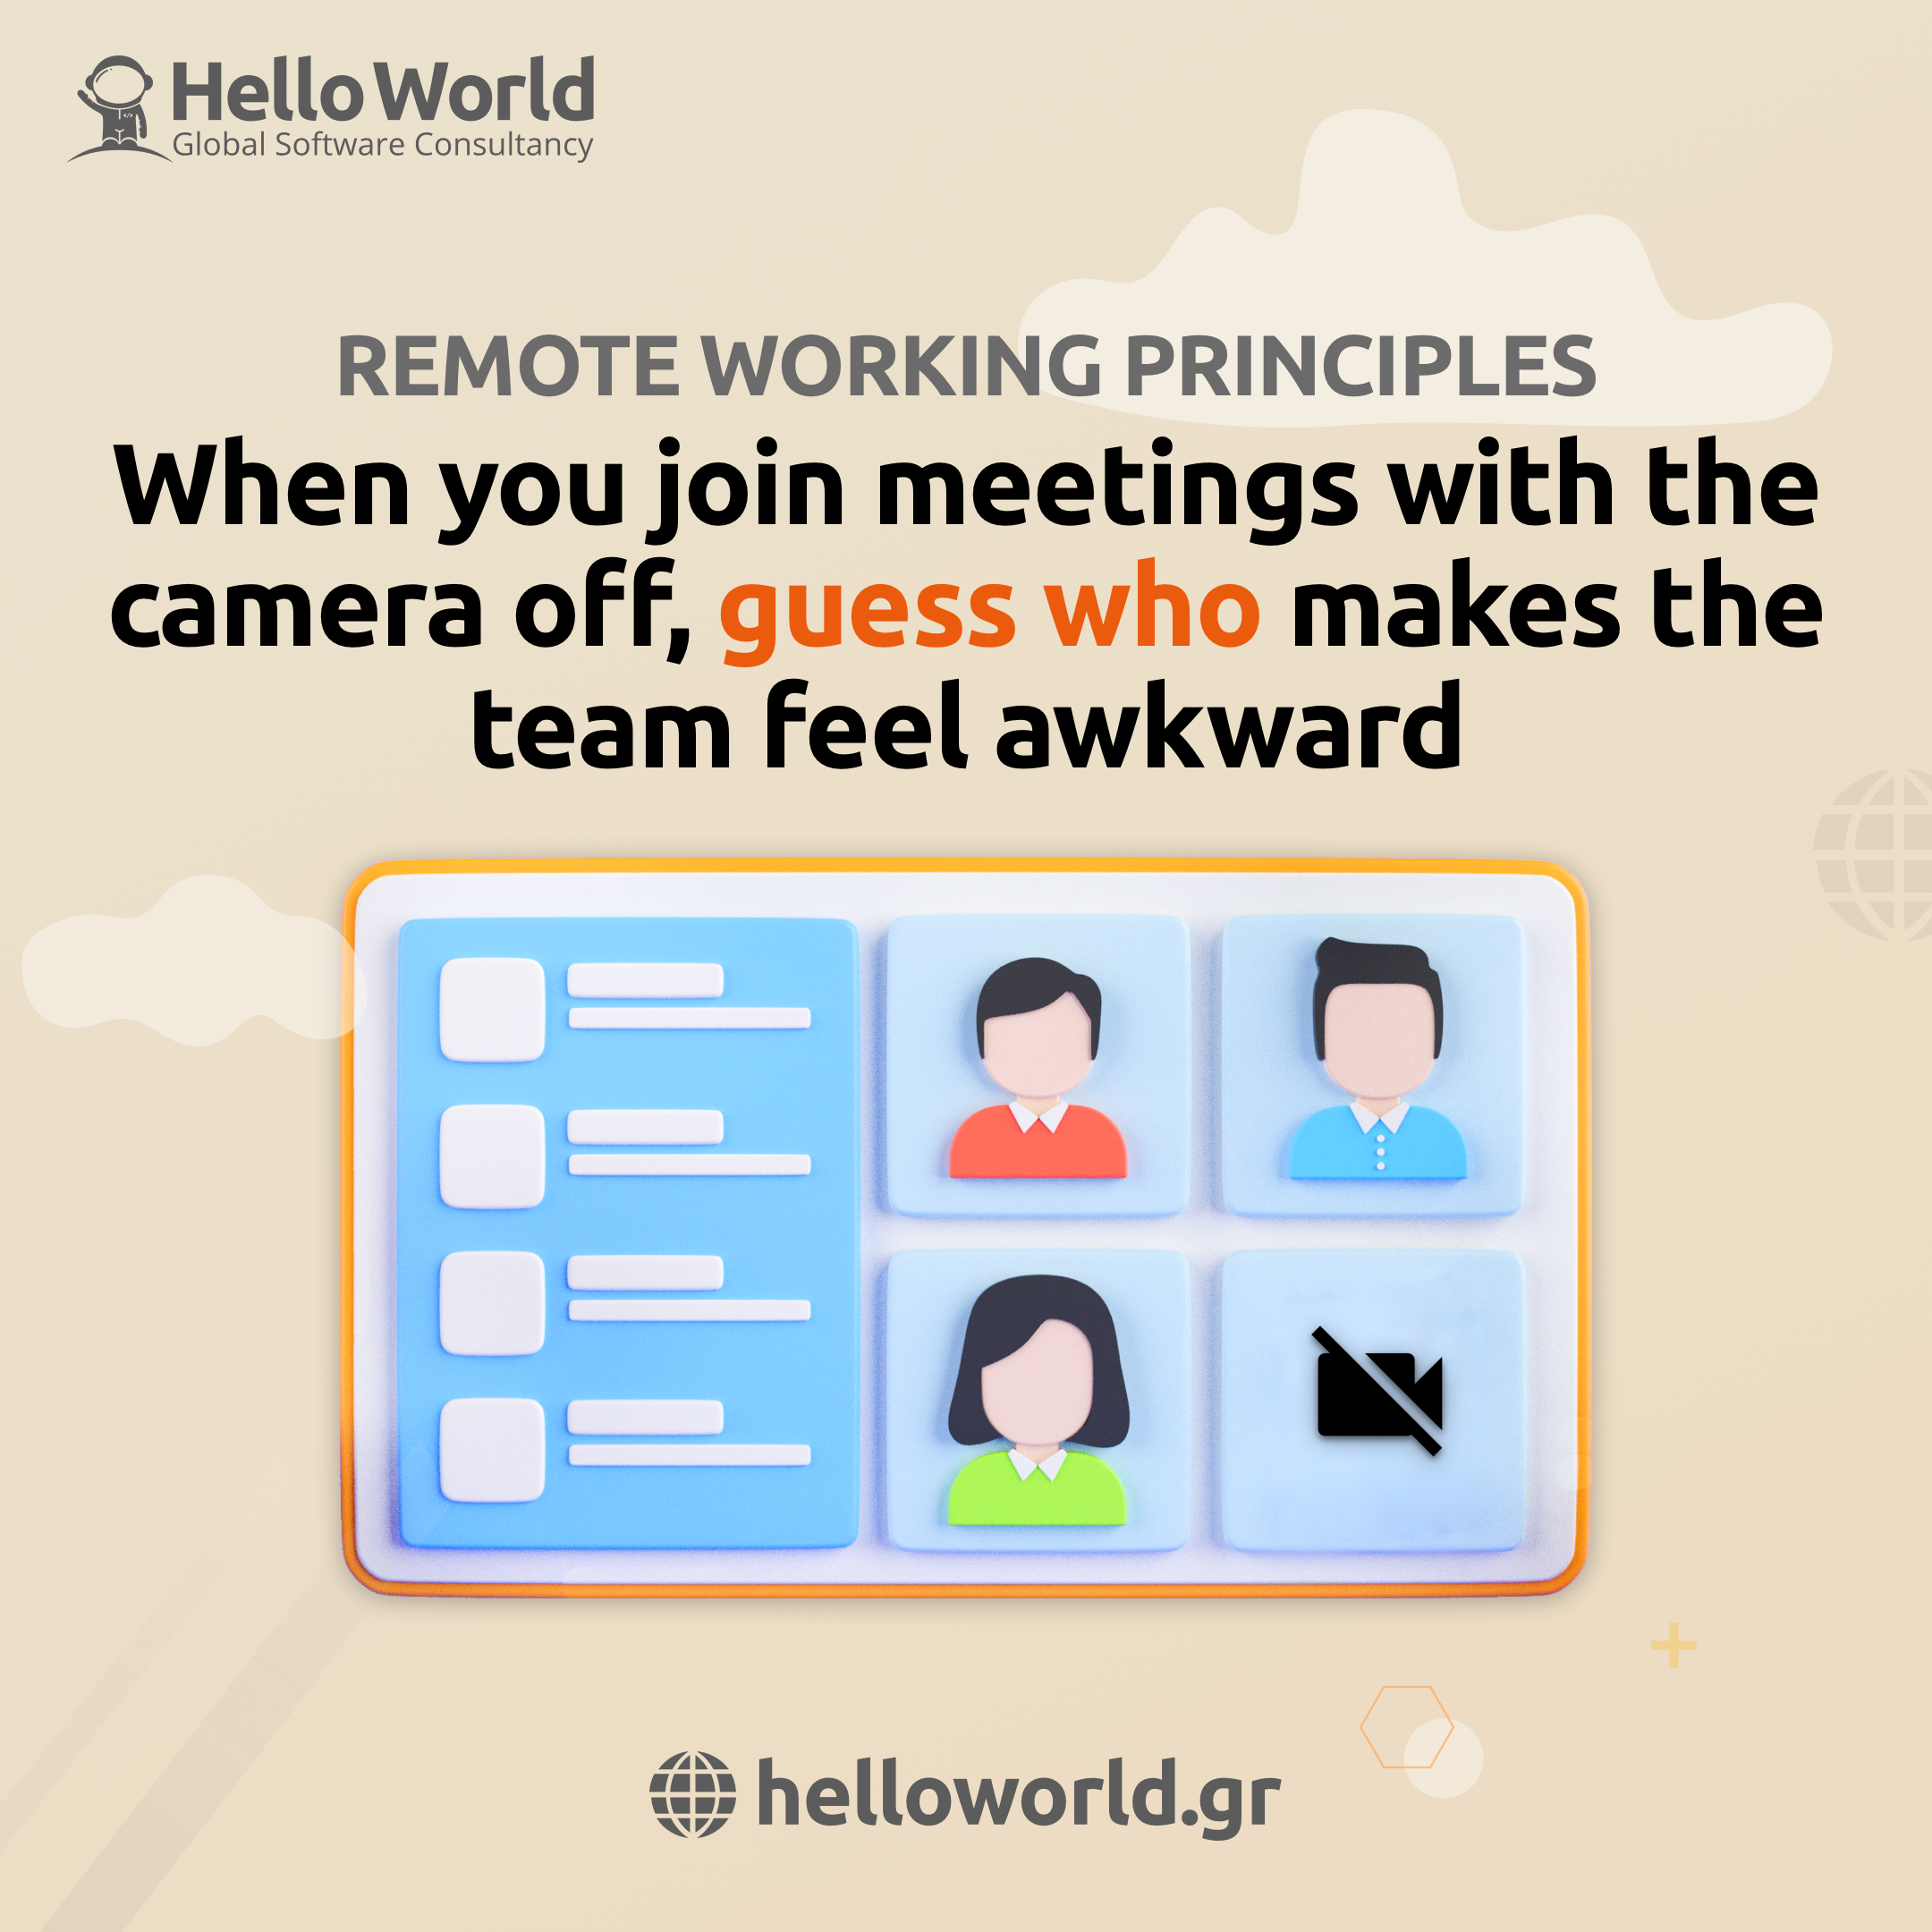 Try to make your teammates feel comfortable when jumping into video calls